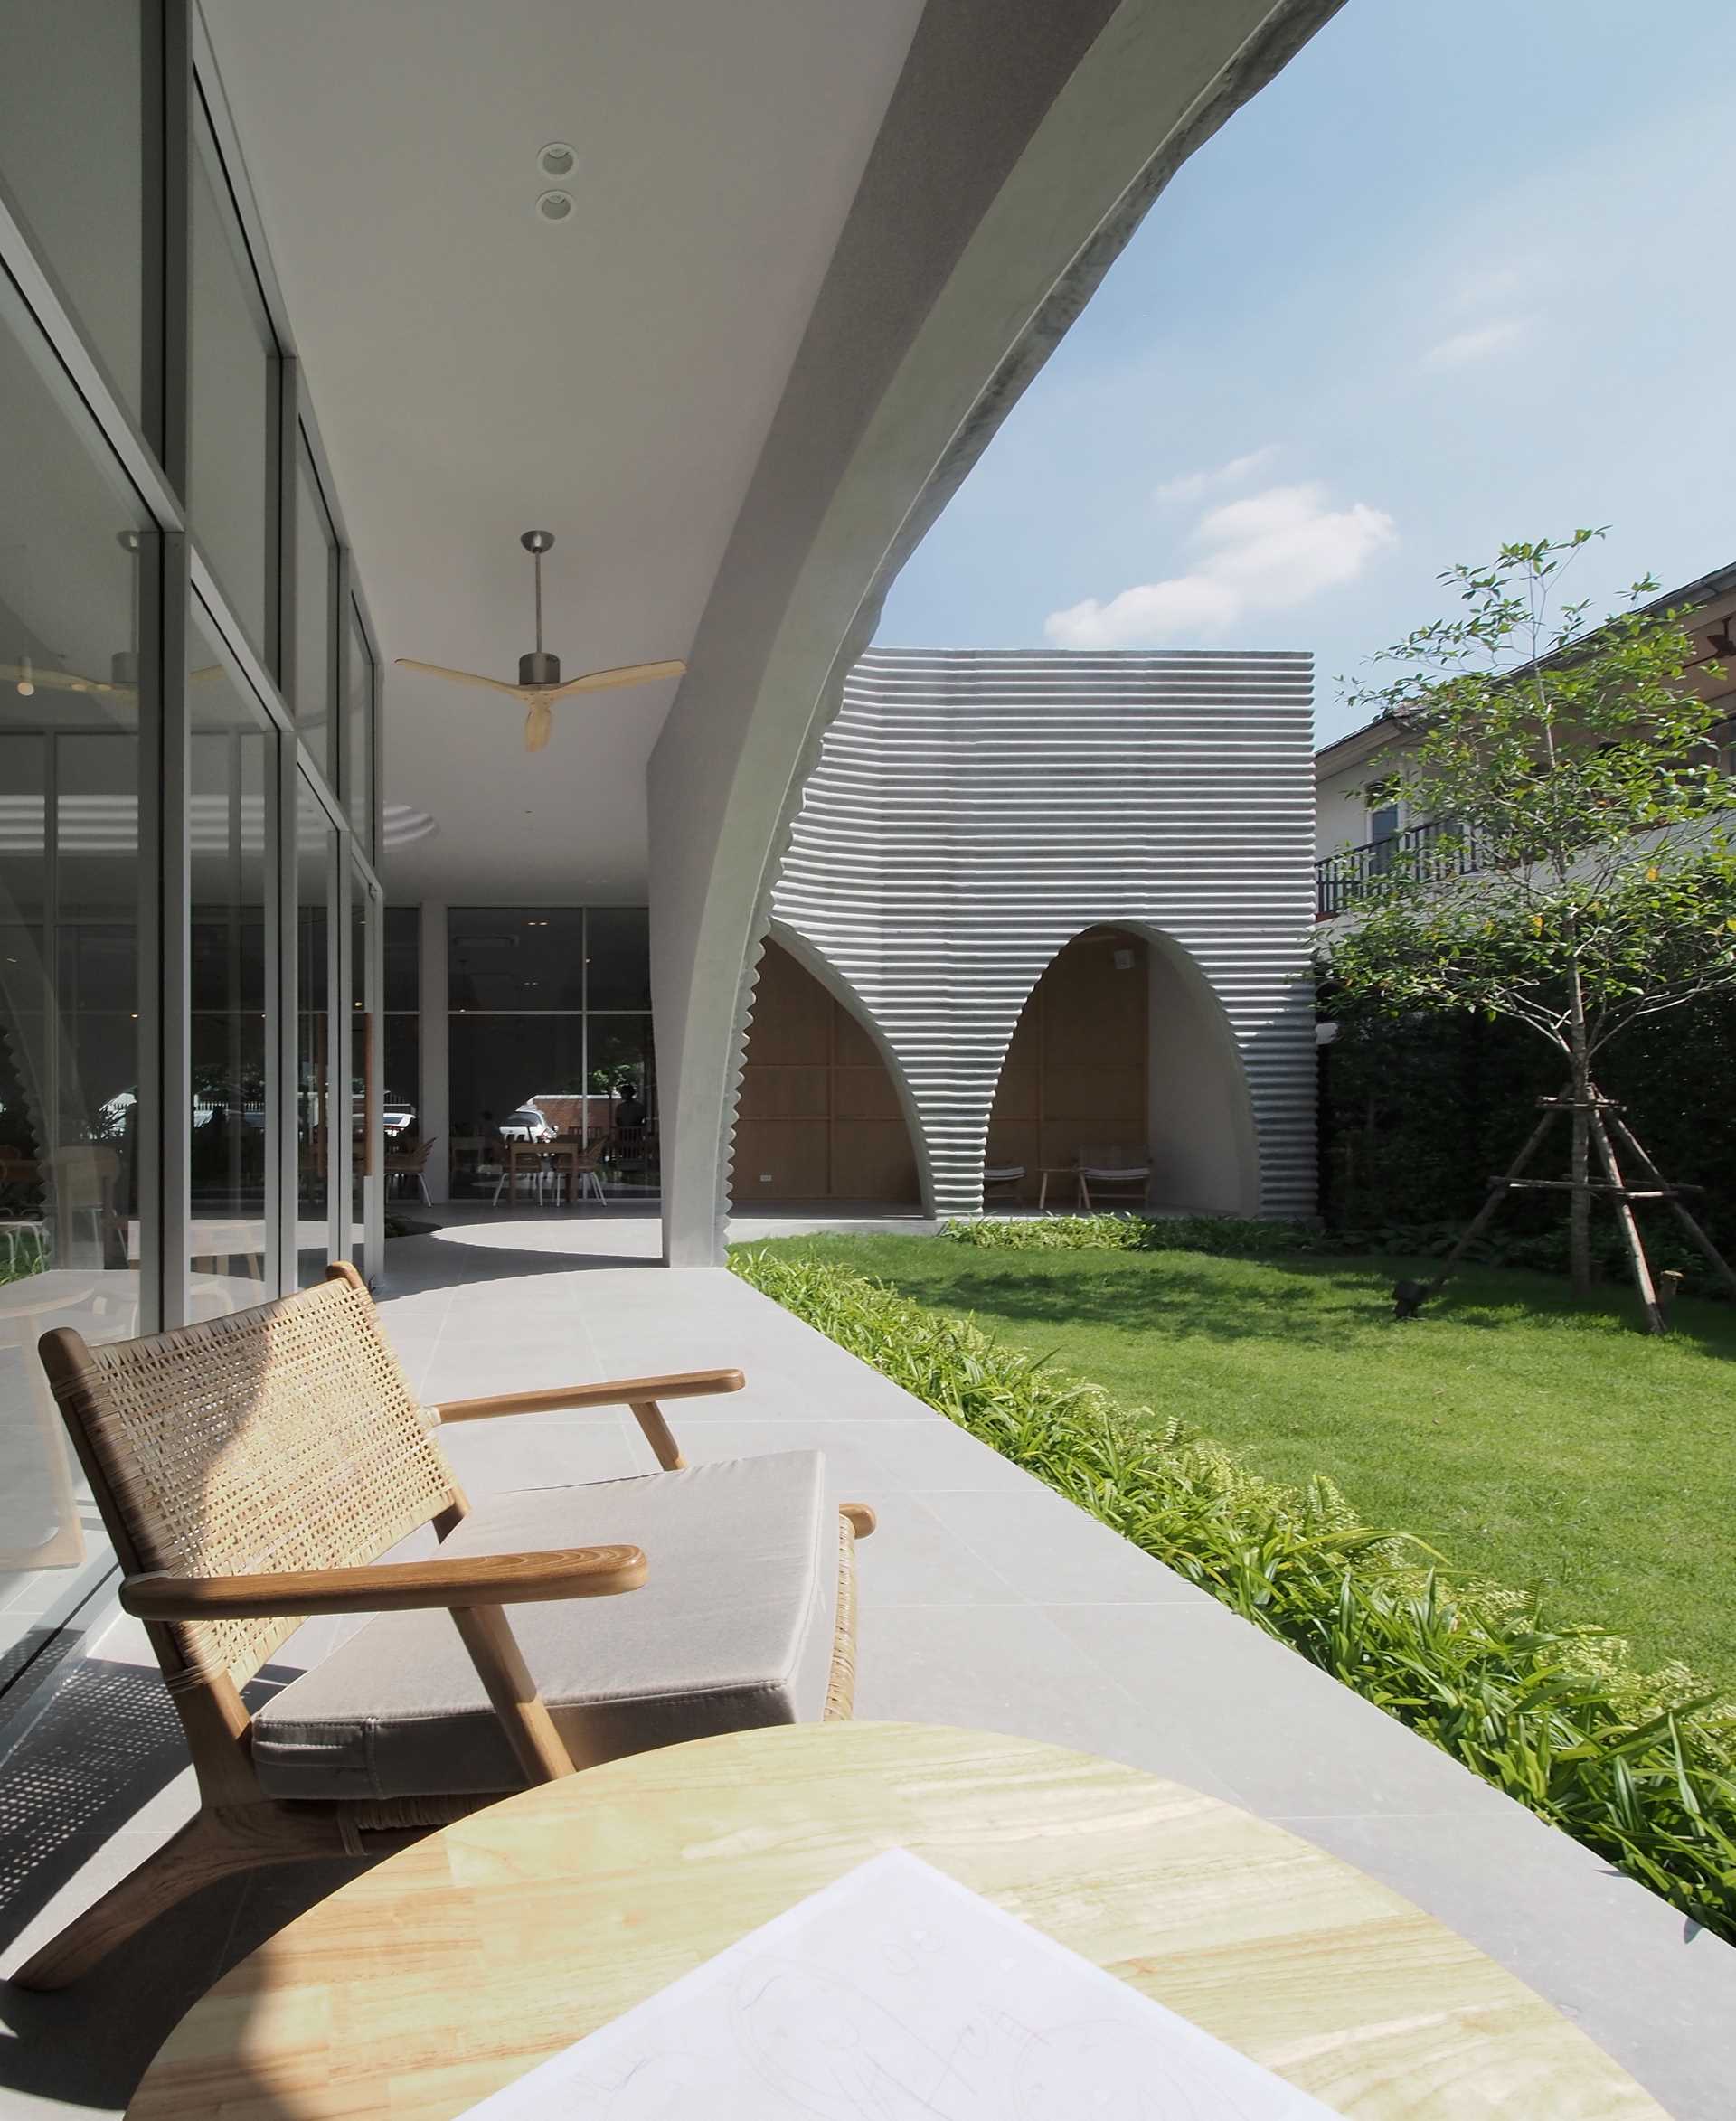 A modern cafe and restaurant with a covered patio and garden, and arched details.